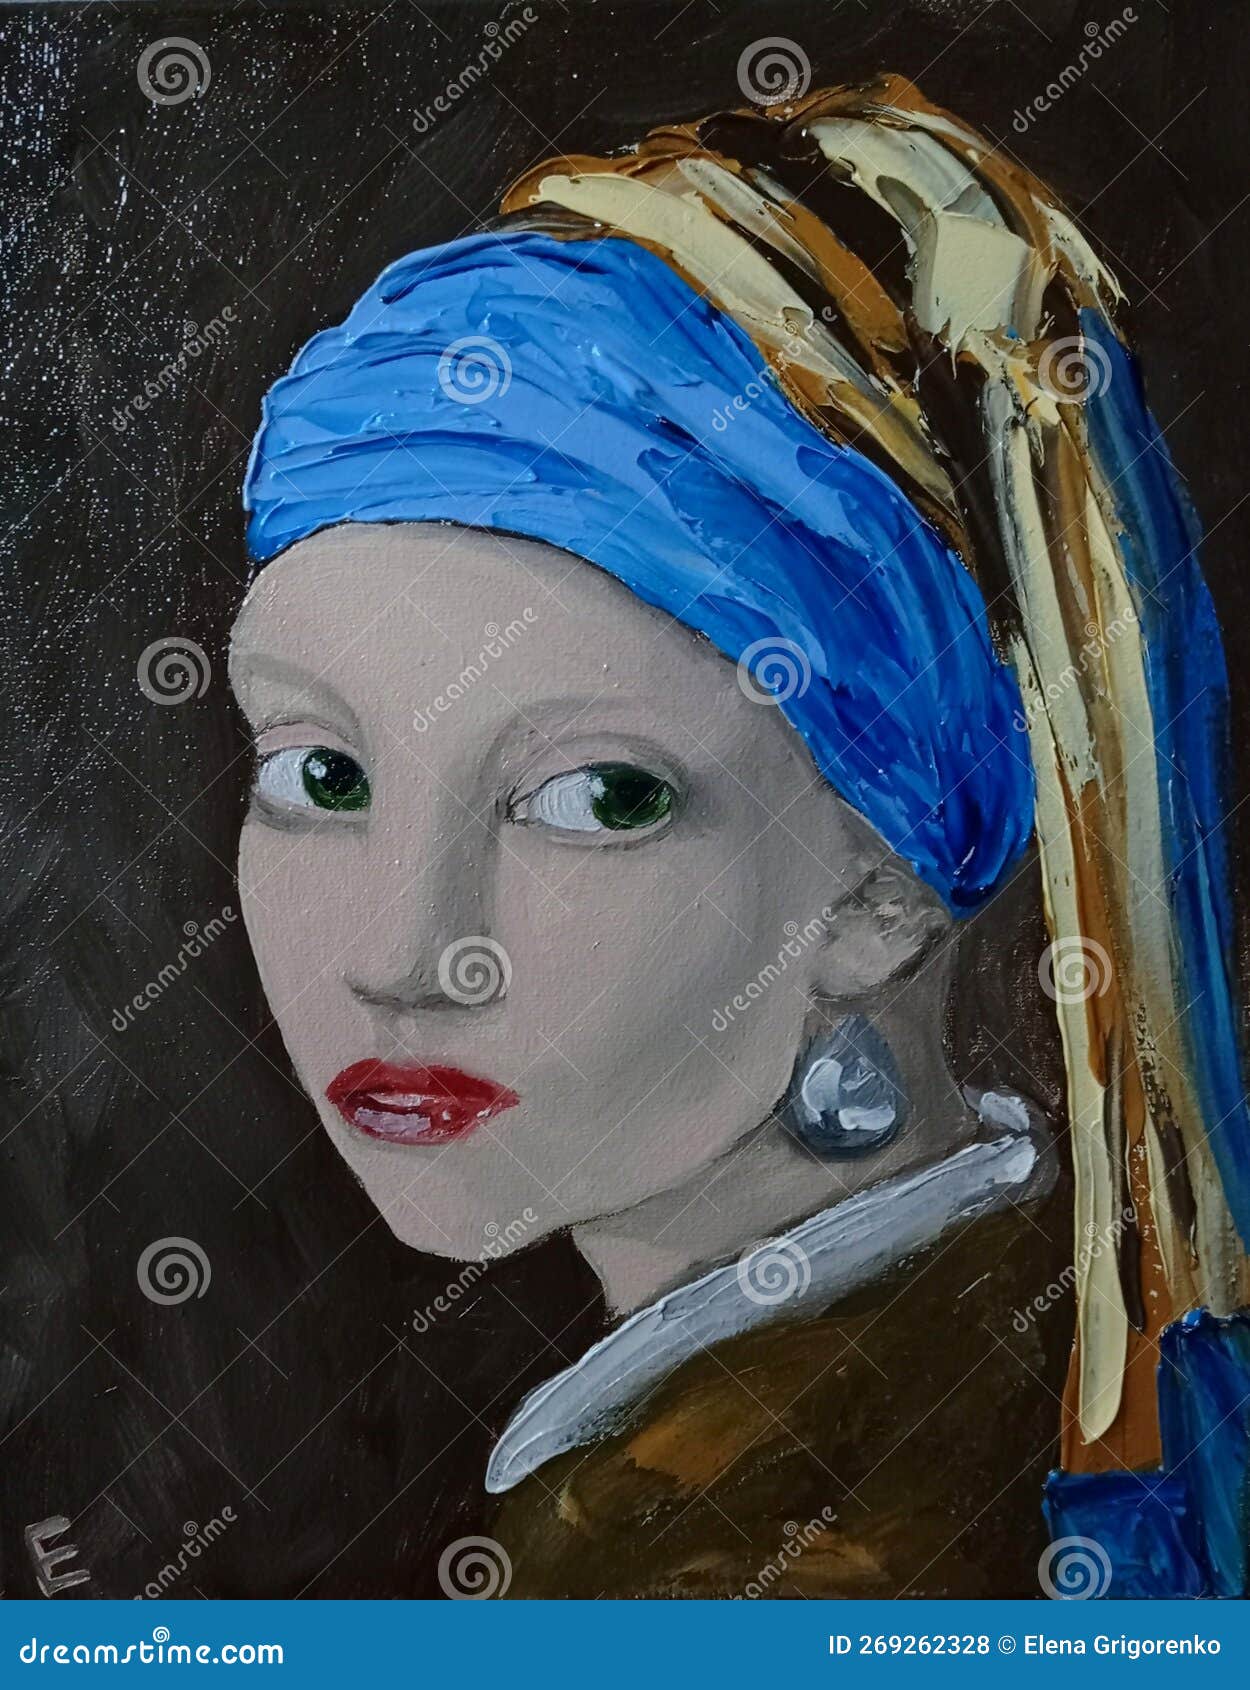 Girl With the Pearl Earring on Vimeo